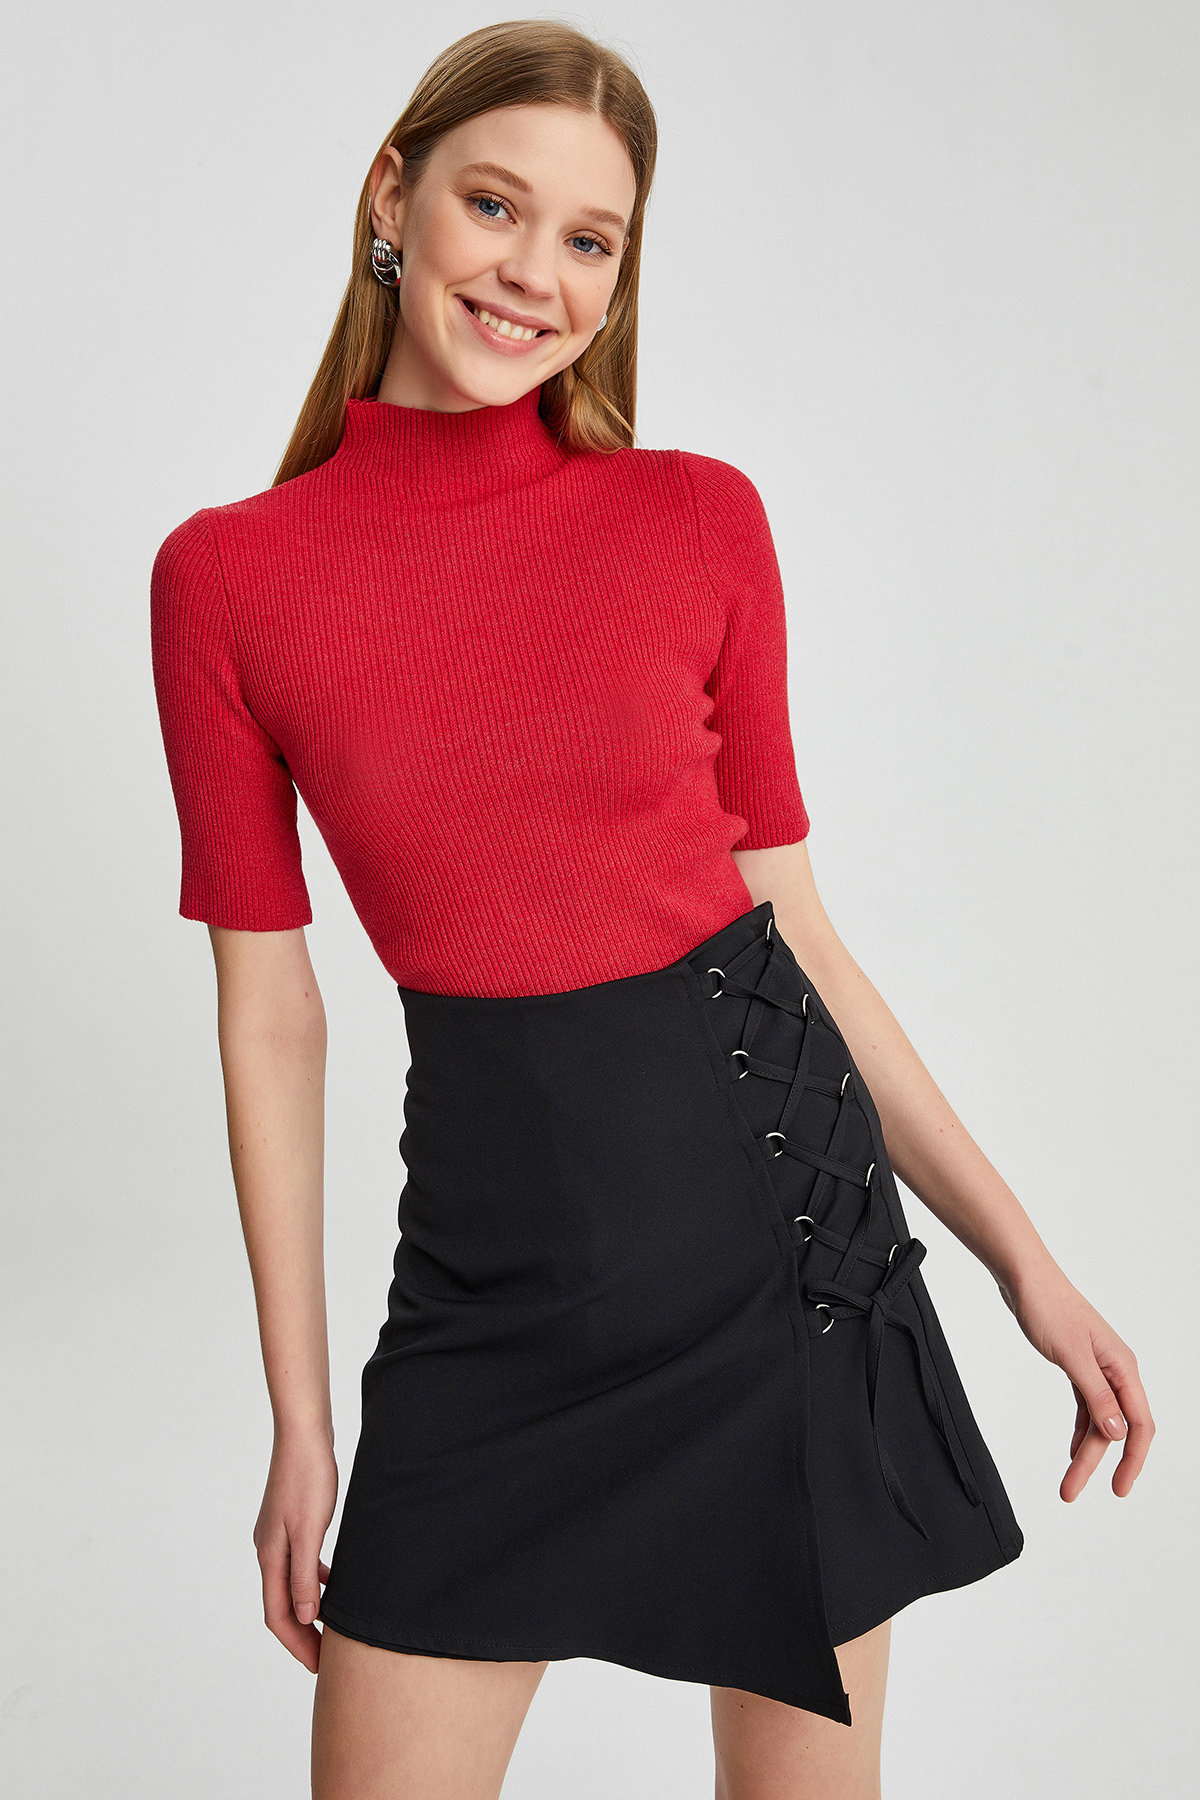 skirt top Fashion  Clothing Street red black fashion design Style styling 